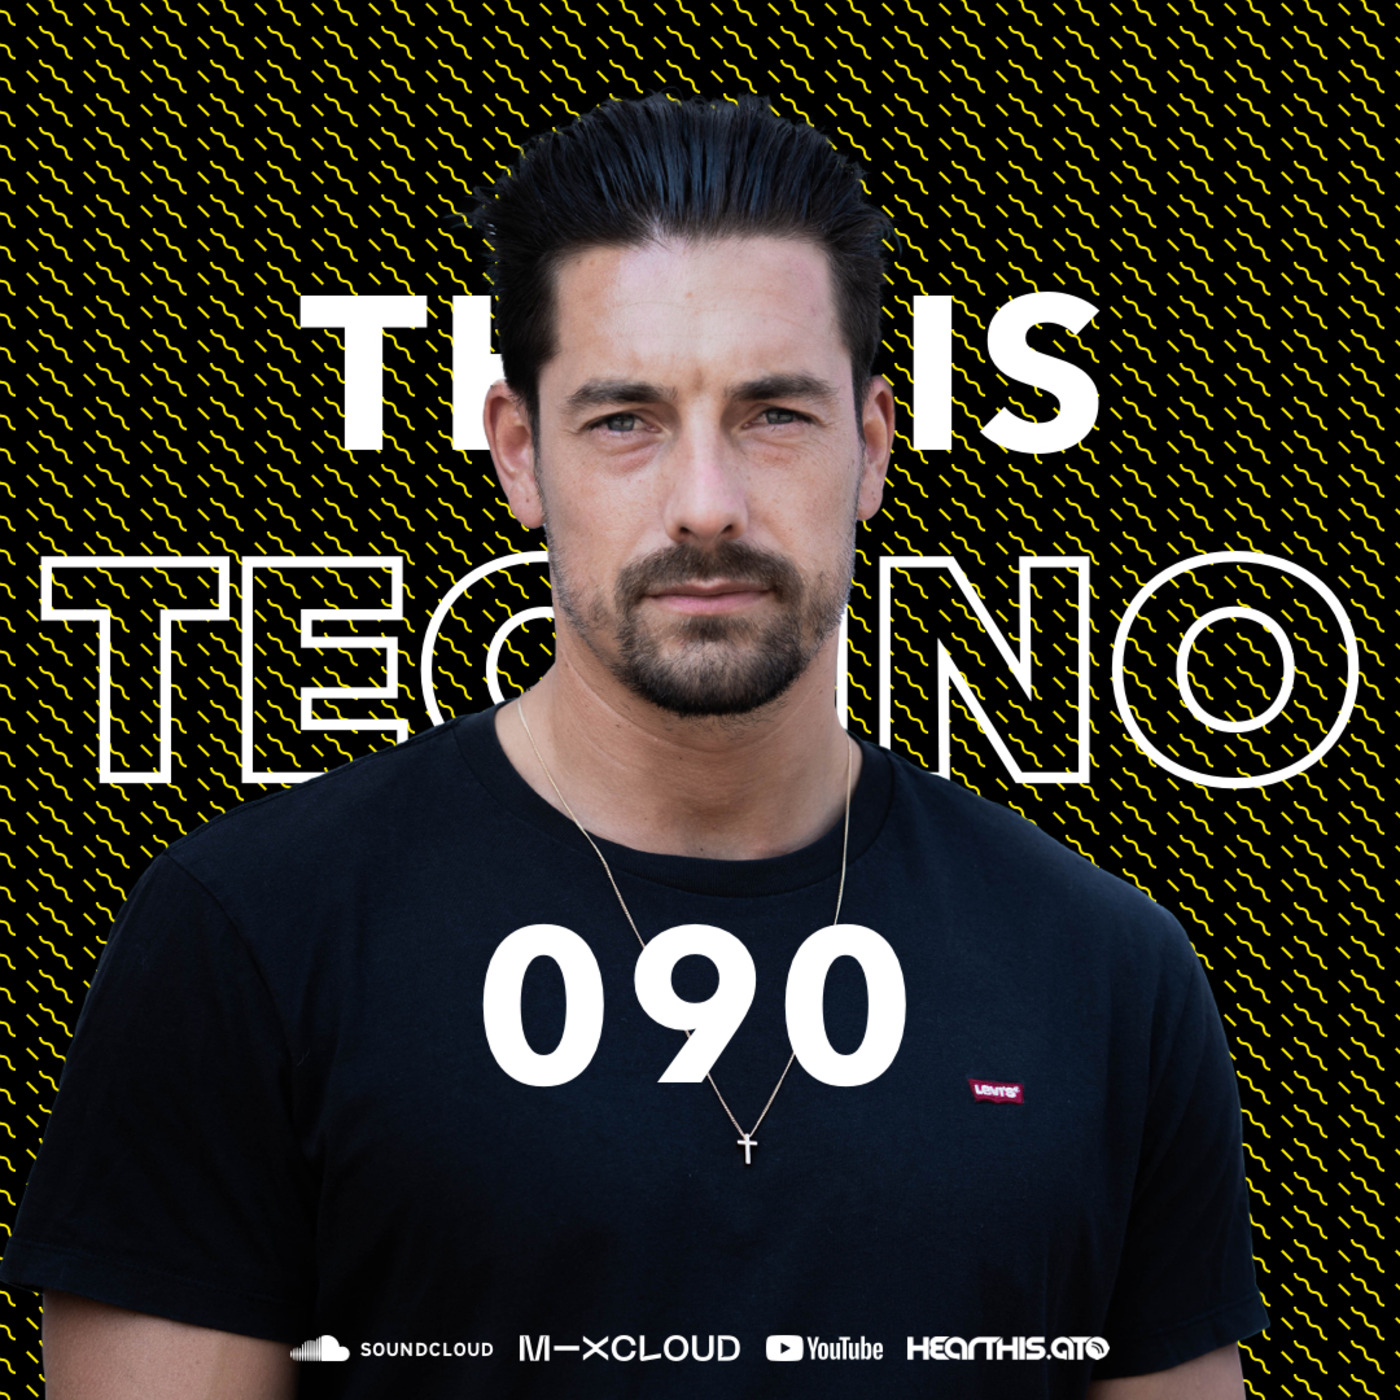 TIT090 - This Is Techno 090 By CSTS